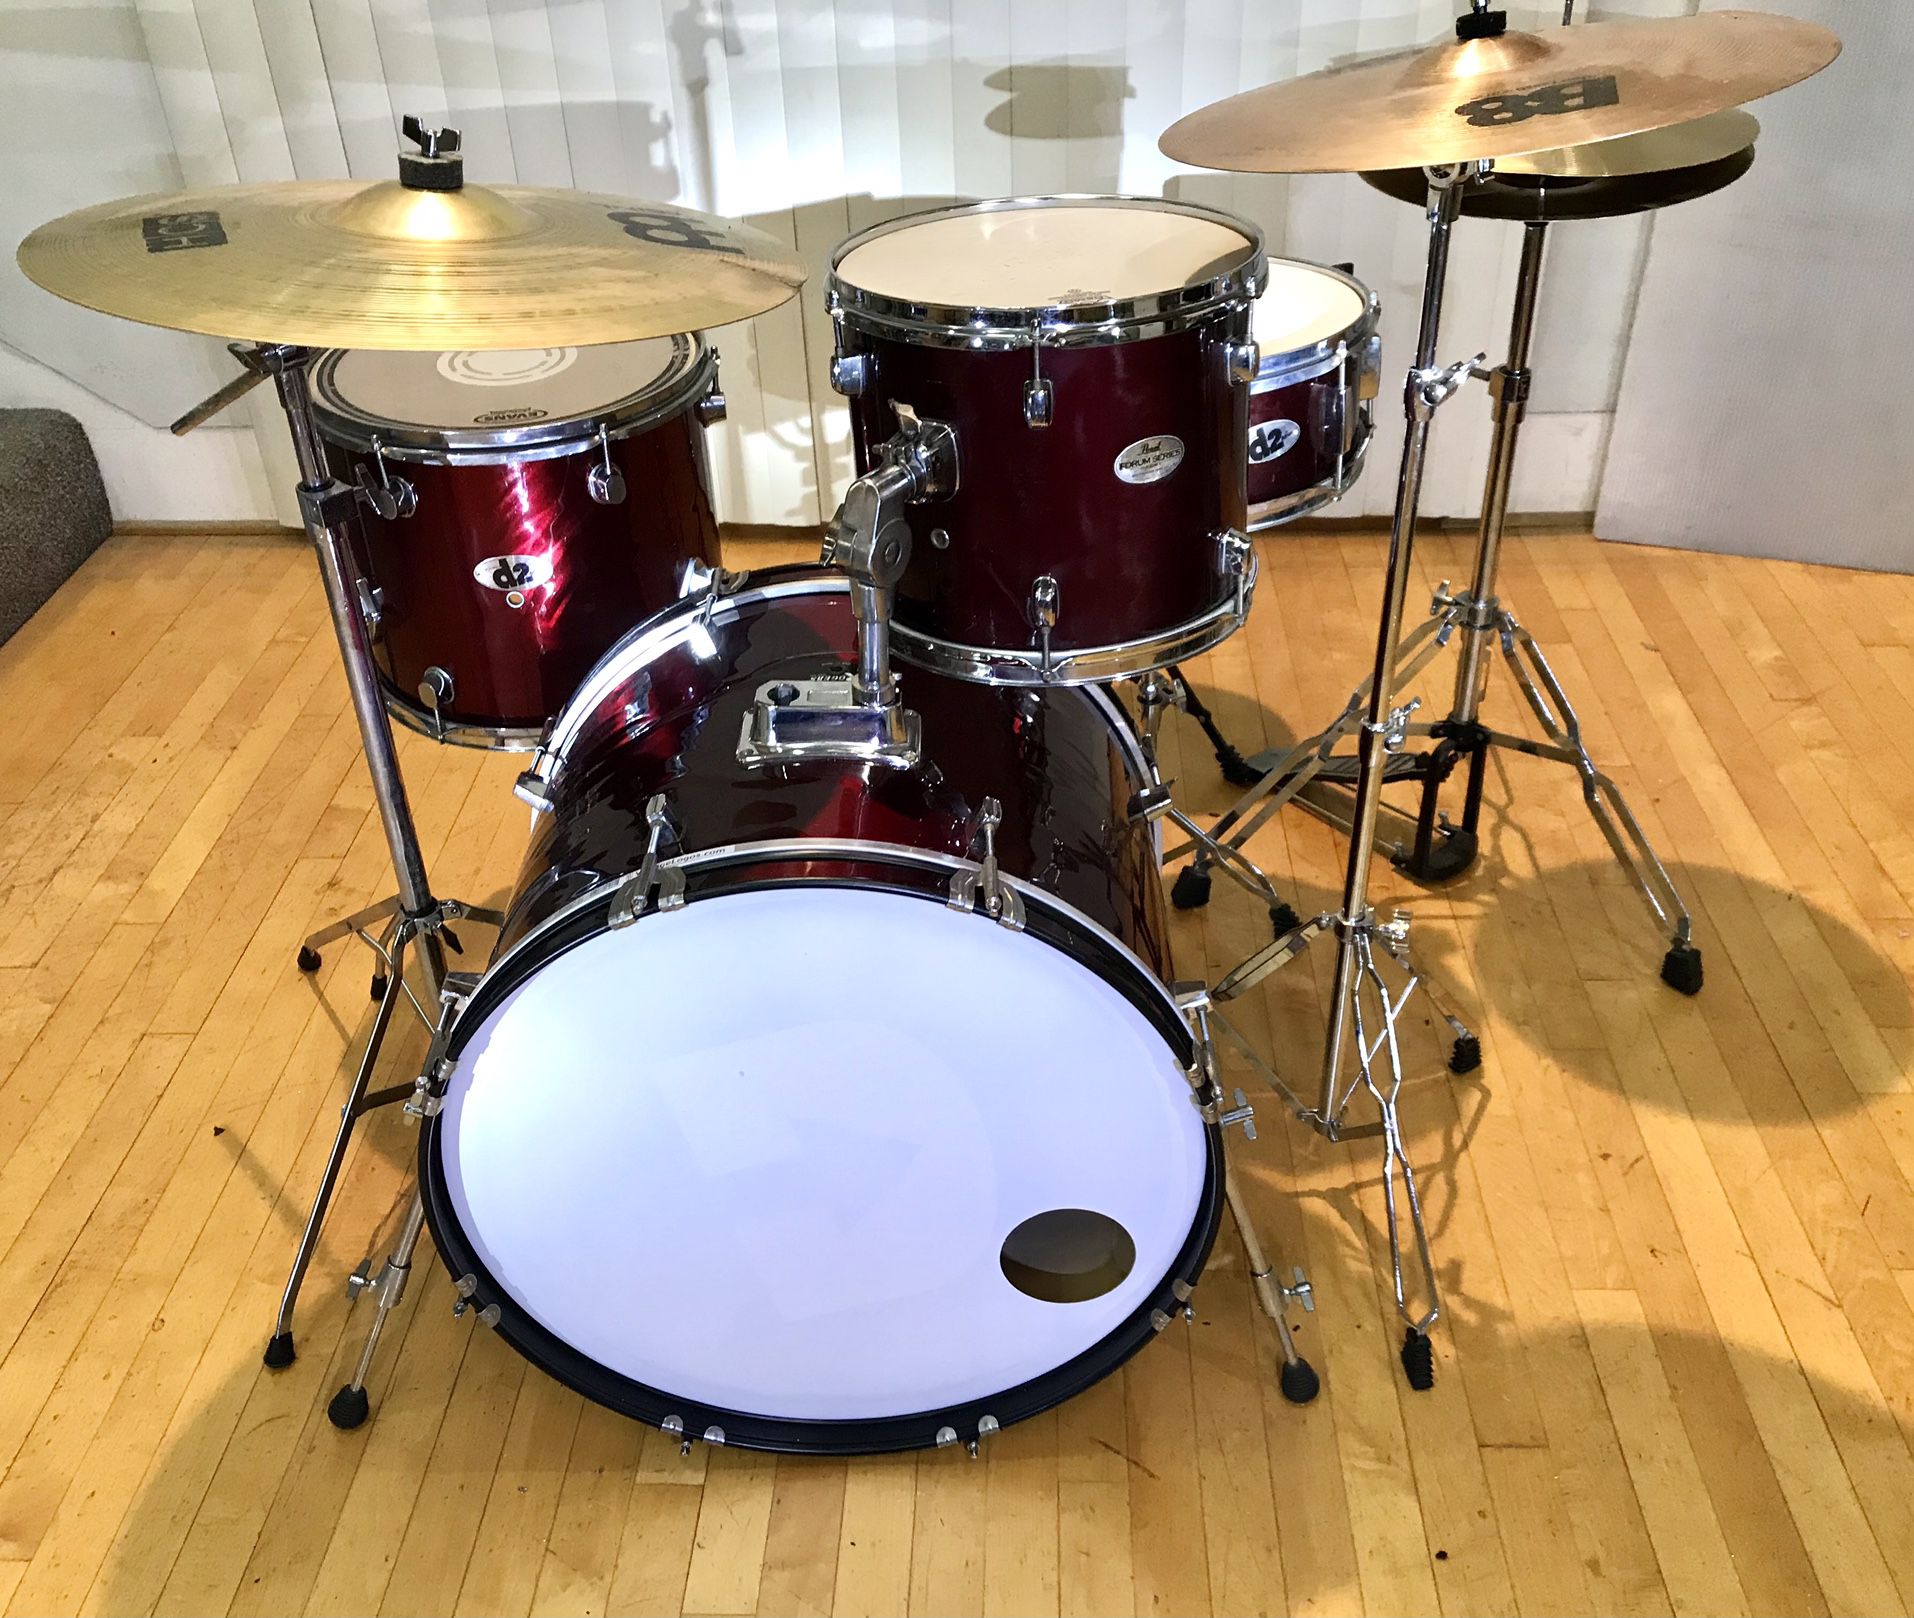 Red Jazz Drum Set Rogers 22” Bass Ddrum Snare And 14” Floor Pearl Tom Sabian Meinl Cymbals Throne Sticks Good Condition $250 in Ontario 91762